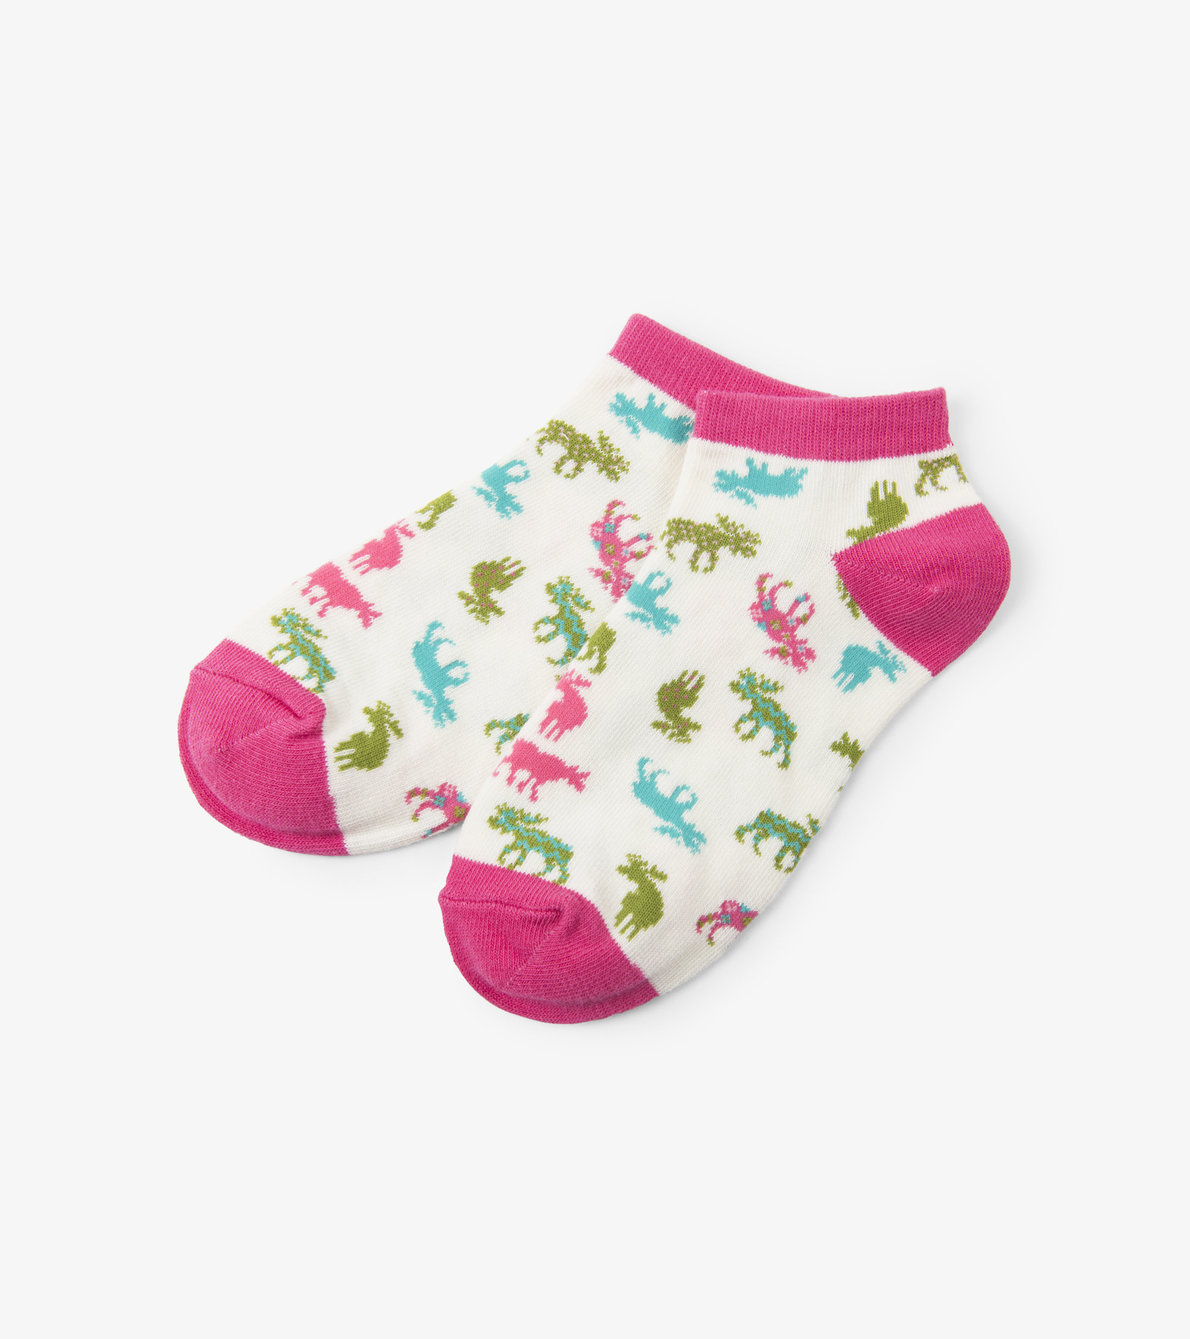 View larger image of Patterned Moose Women's Ankle Socks